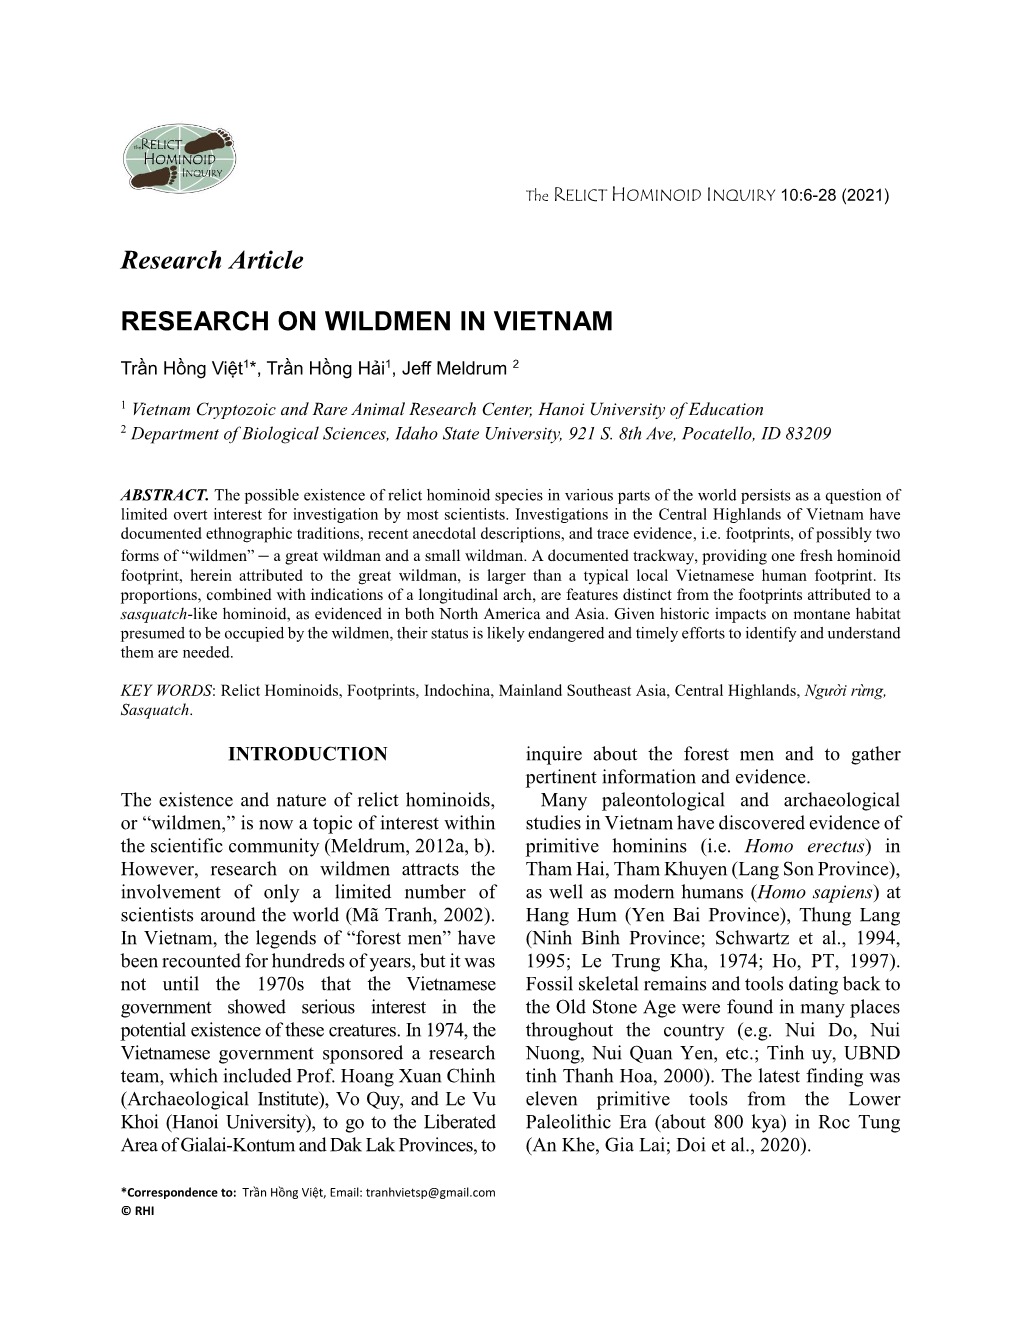 Research Article RESEARCH on WILDMEN in VIETNAM